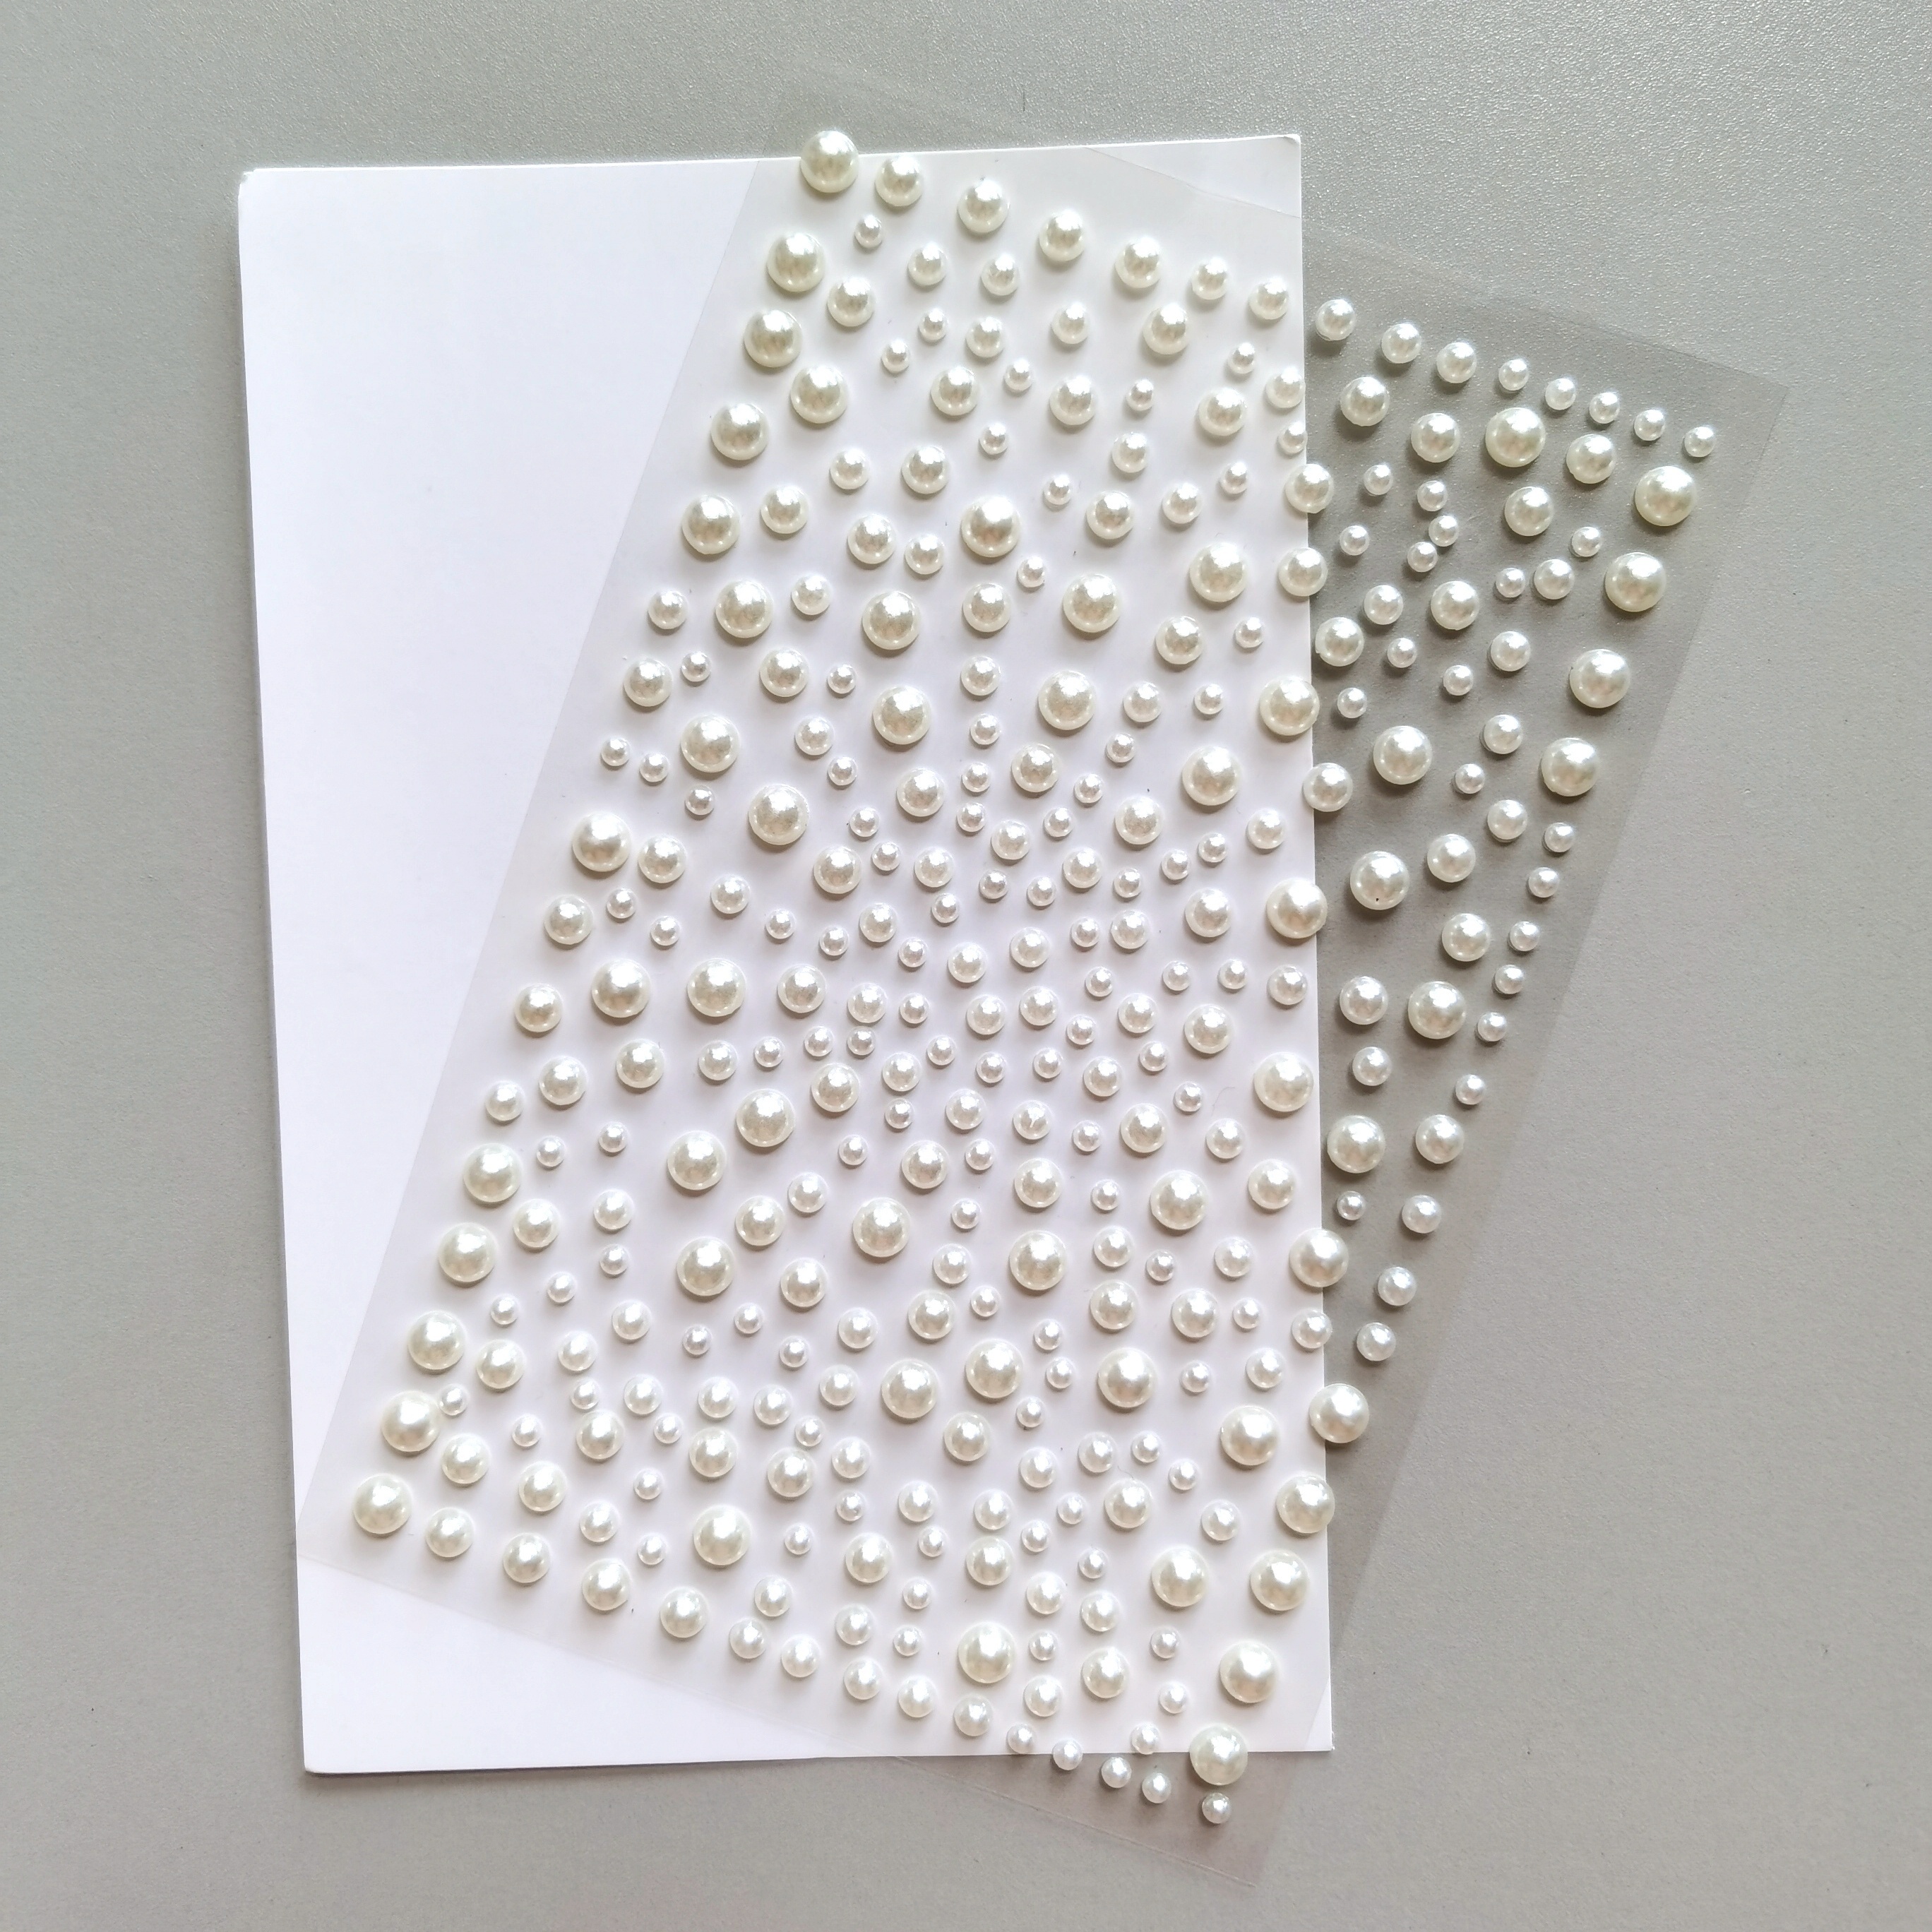 Self-adhesive Pearl Stickers, White Flat Back Pearl Stickers For Face  Beauty Makeup Nail Art Phone DIY Crafts Home Decoration Clipping Decoration